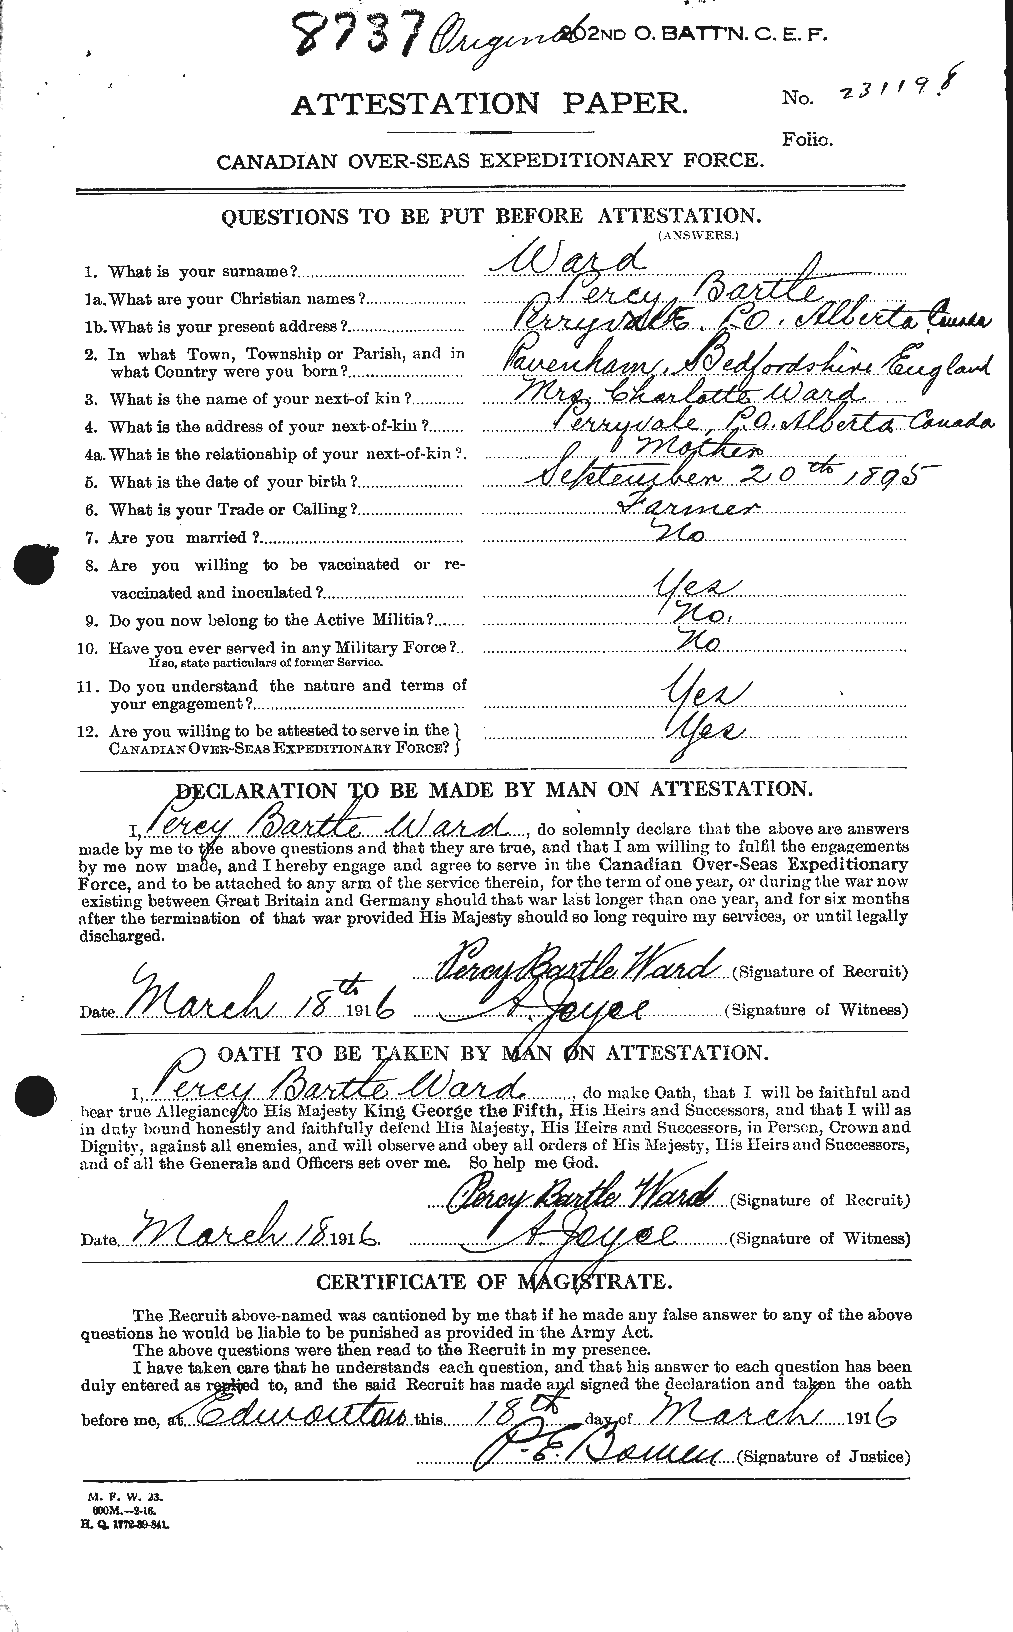 Personnel Records of the First World War - CEF 659624a